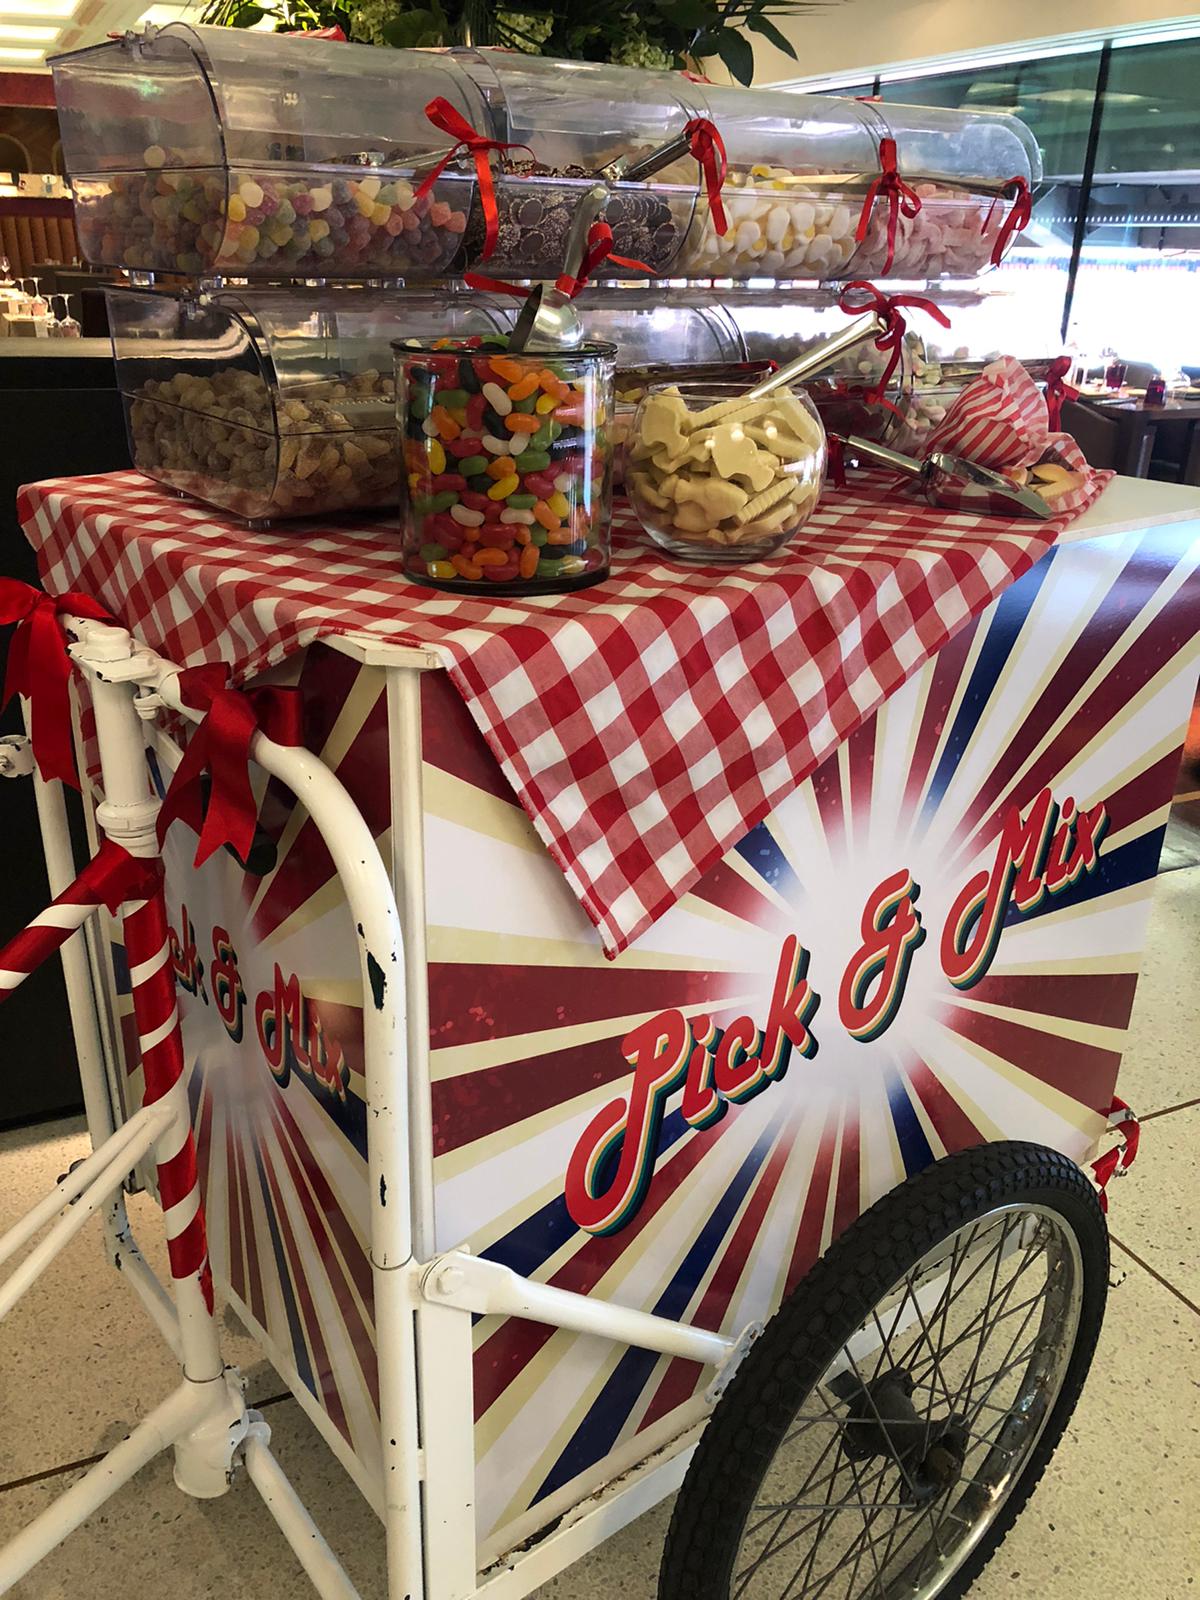 https://www.eventsfactor.co.uk/pick-and-mix-tricycle-london/